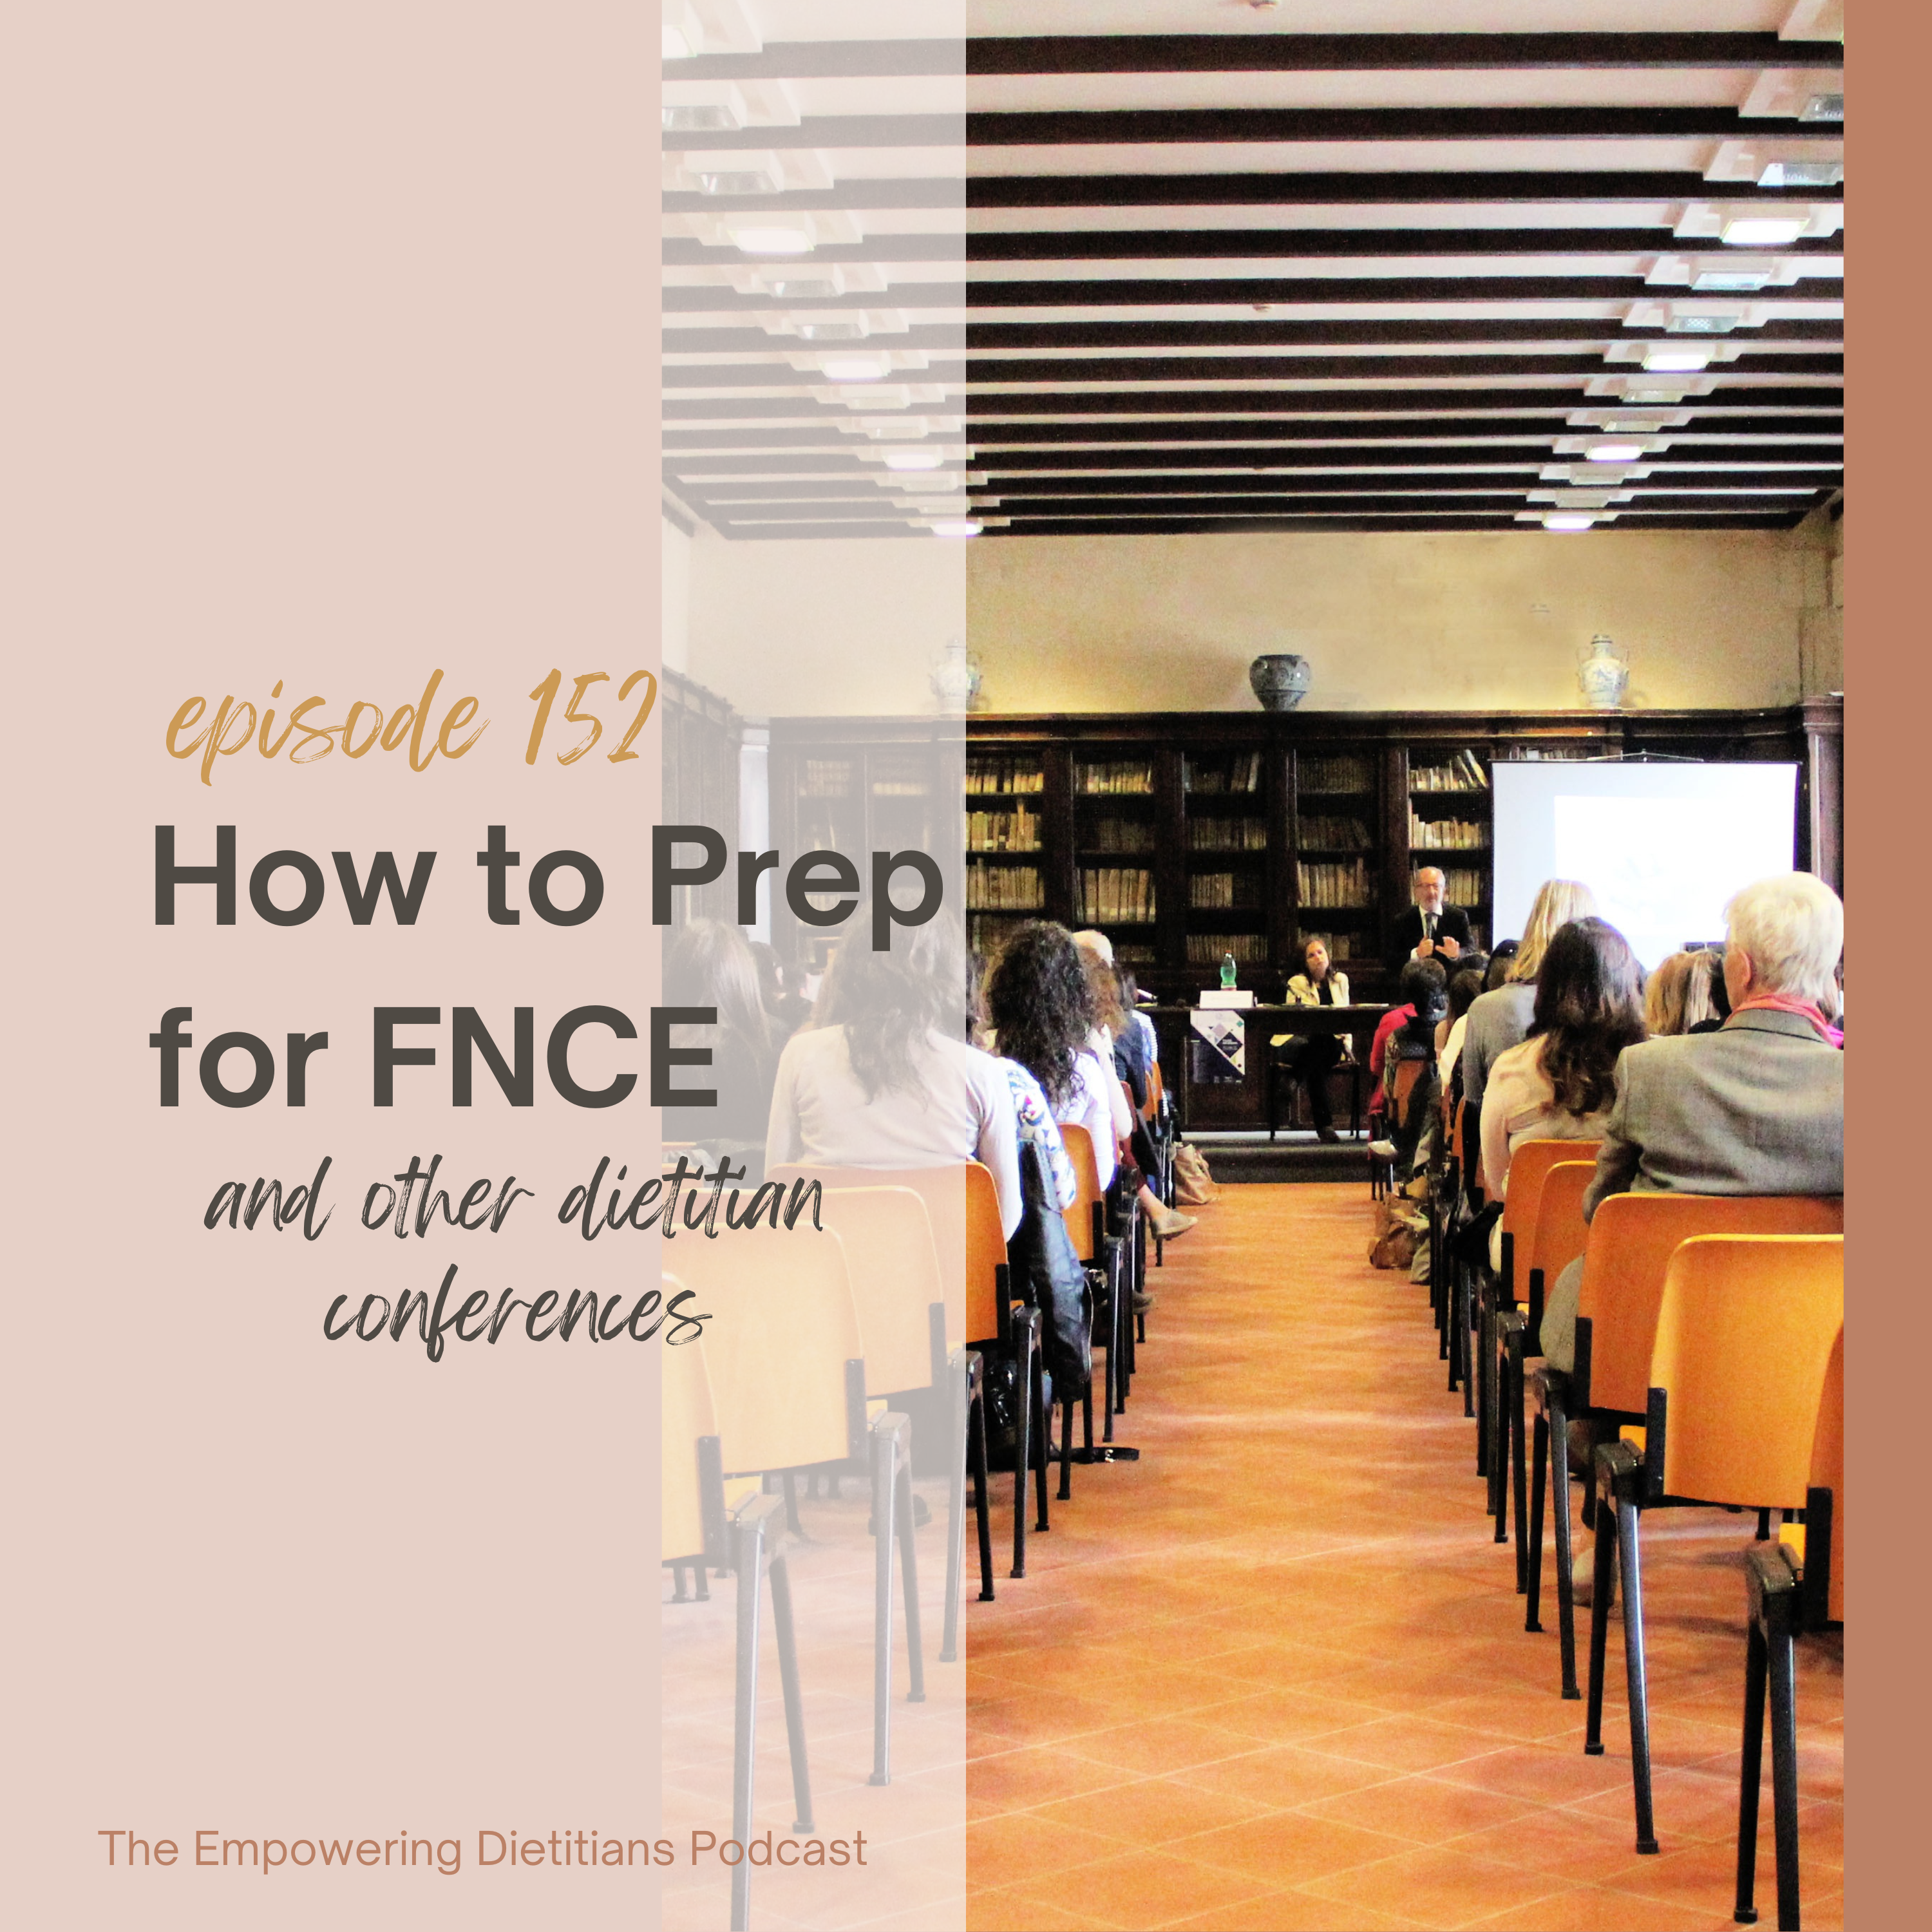 how to prep for fnce and other dietitian conferences